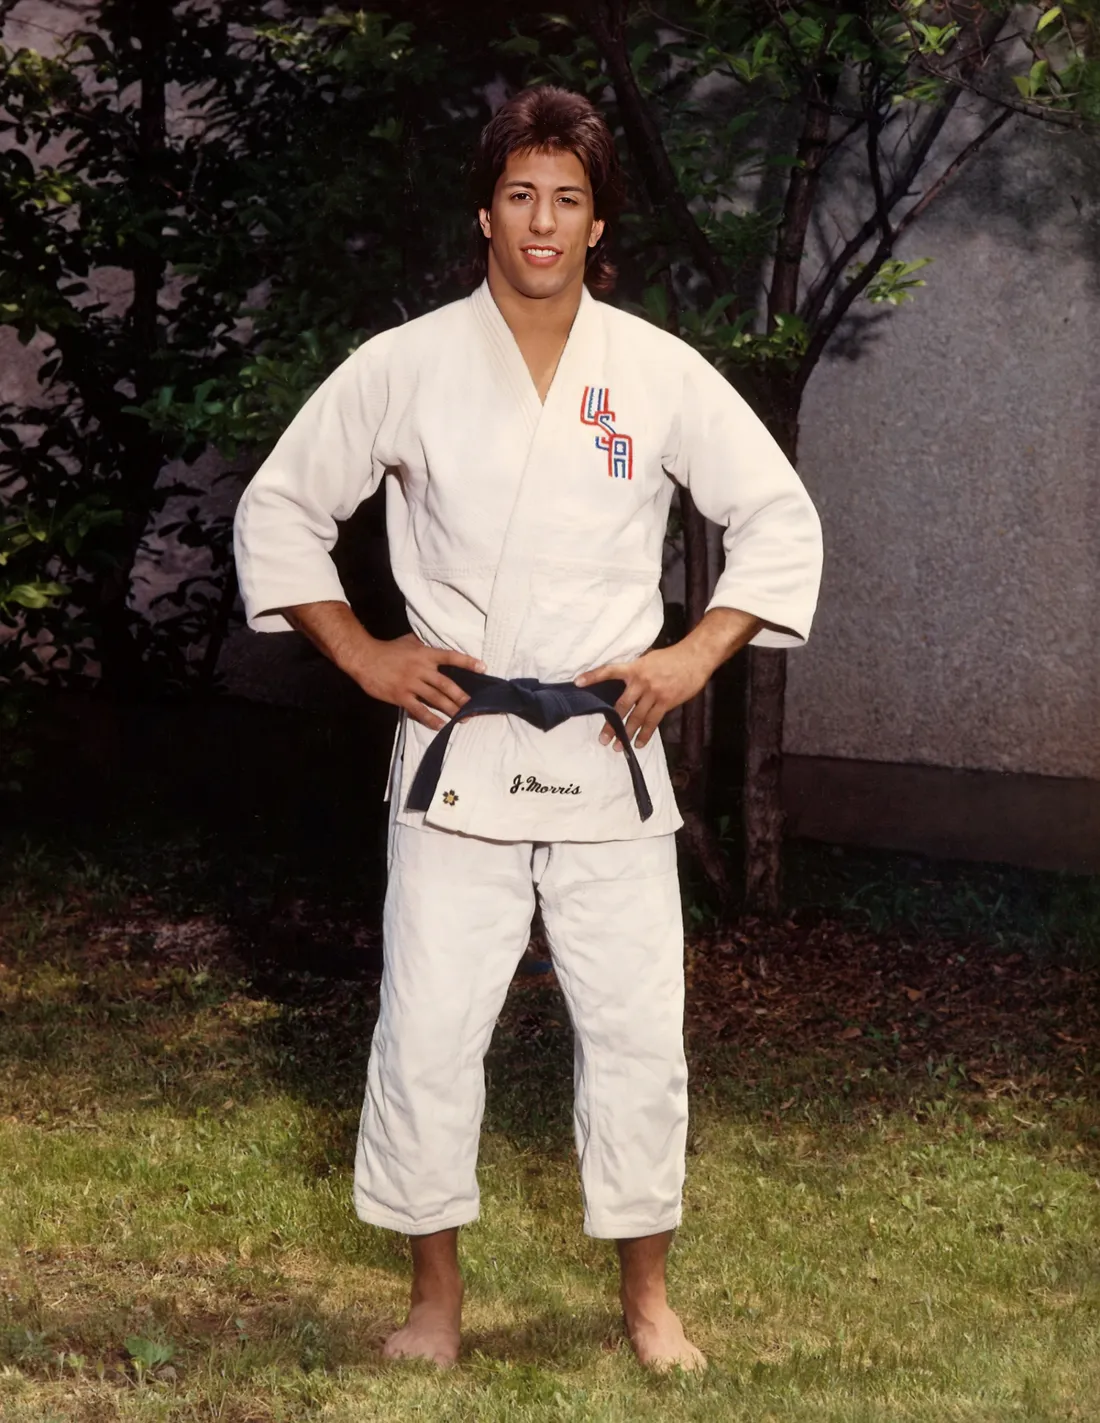 Jason Morris standing in a karate outfit.